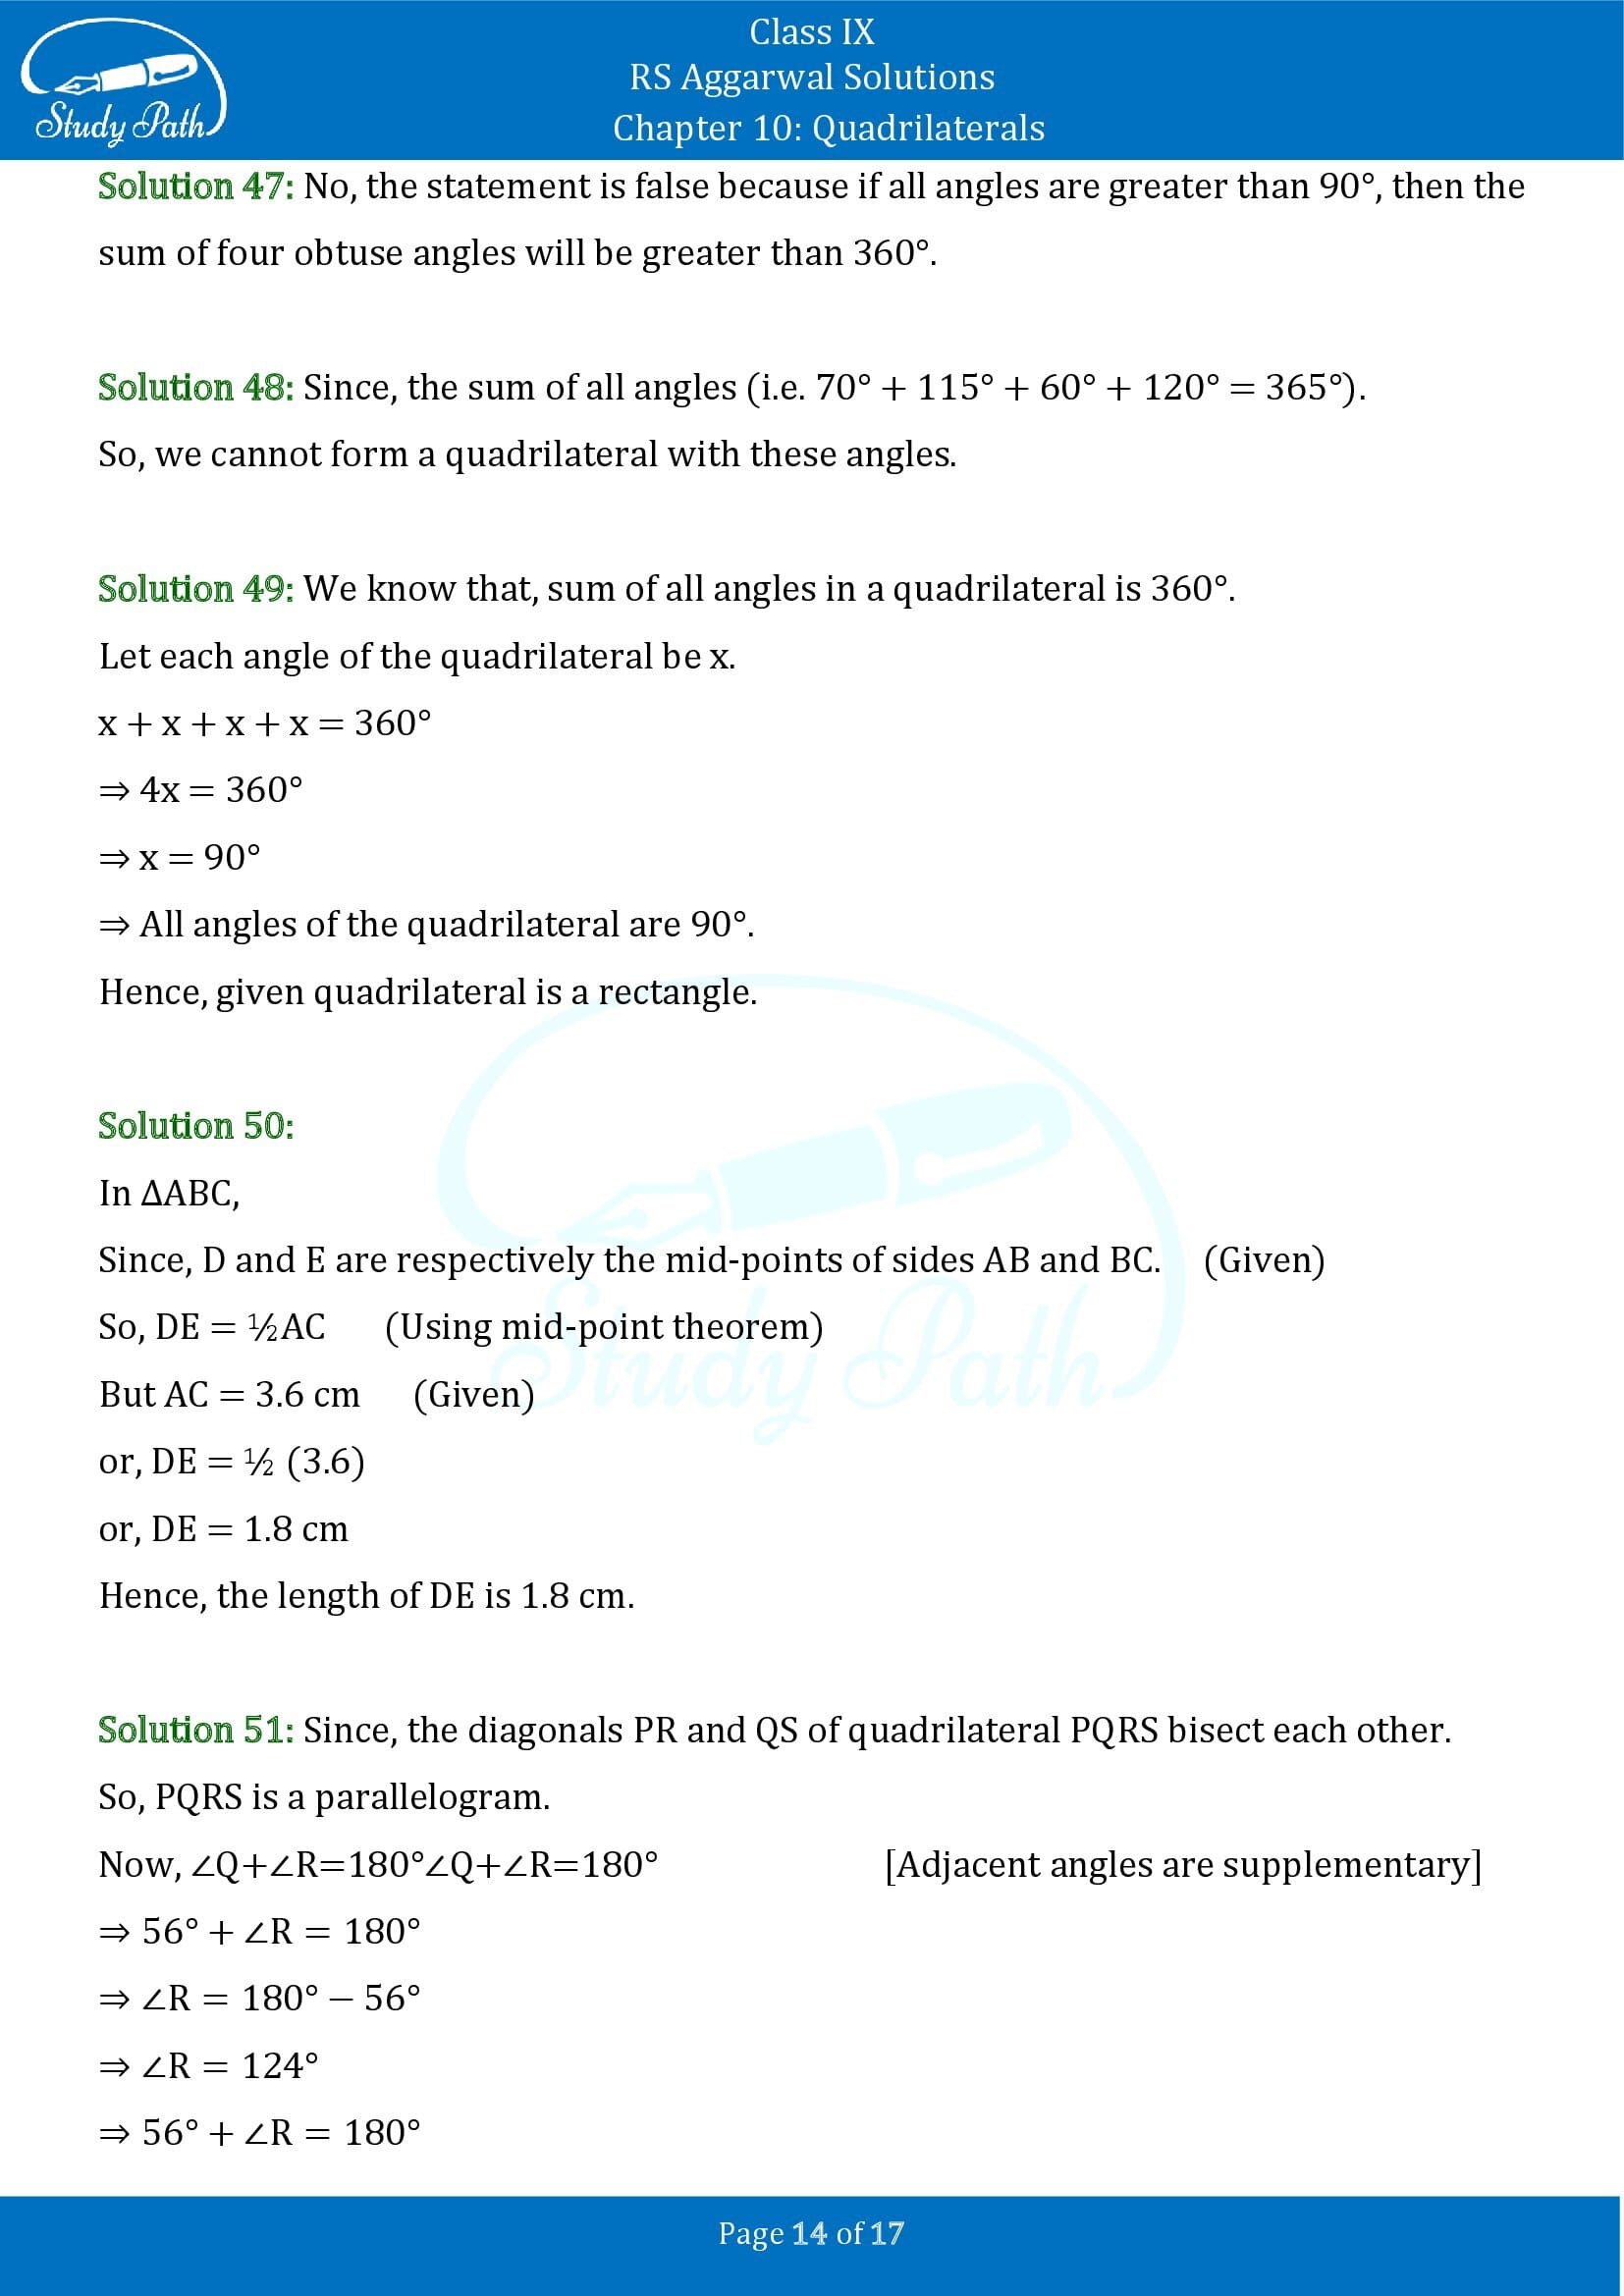 RS Aggarwal Solutions Class 9 Chapter 10 Quadrilaterals Multiple Choice Questions MCQs 00014